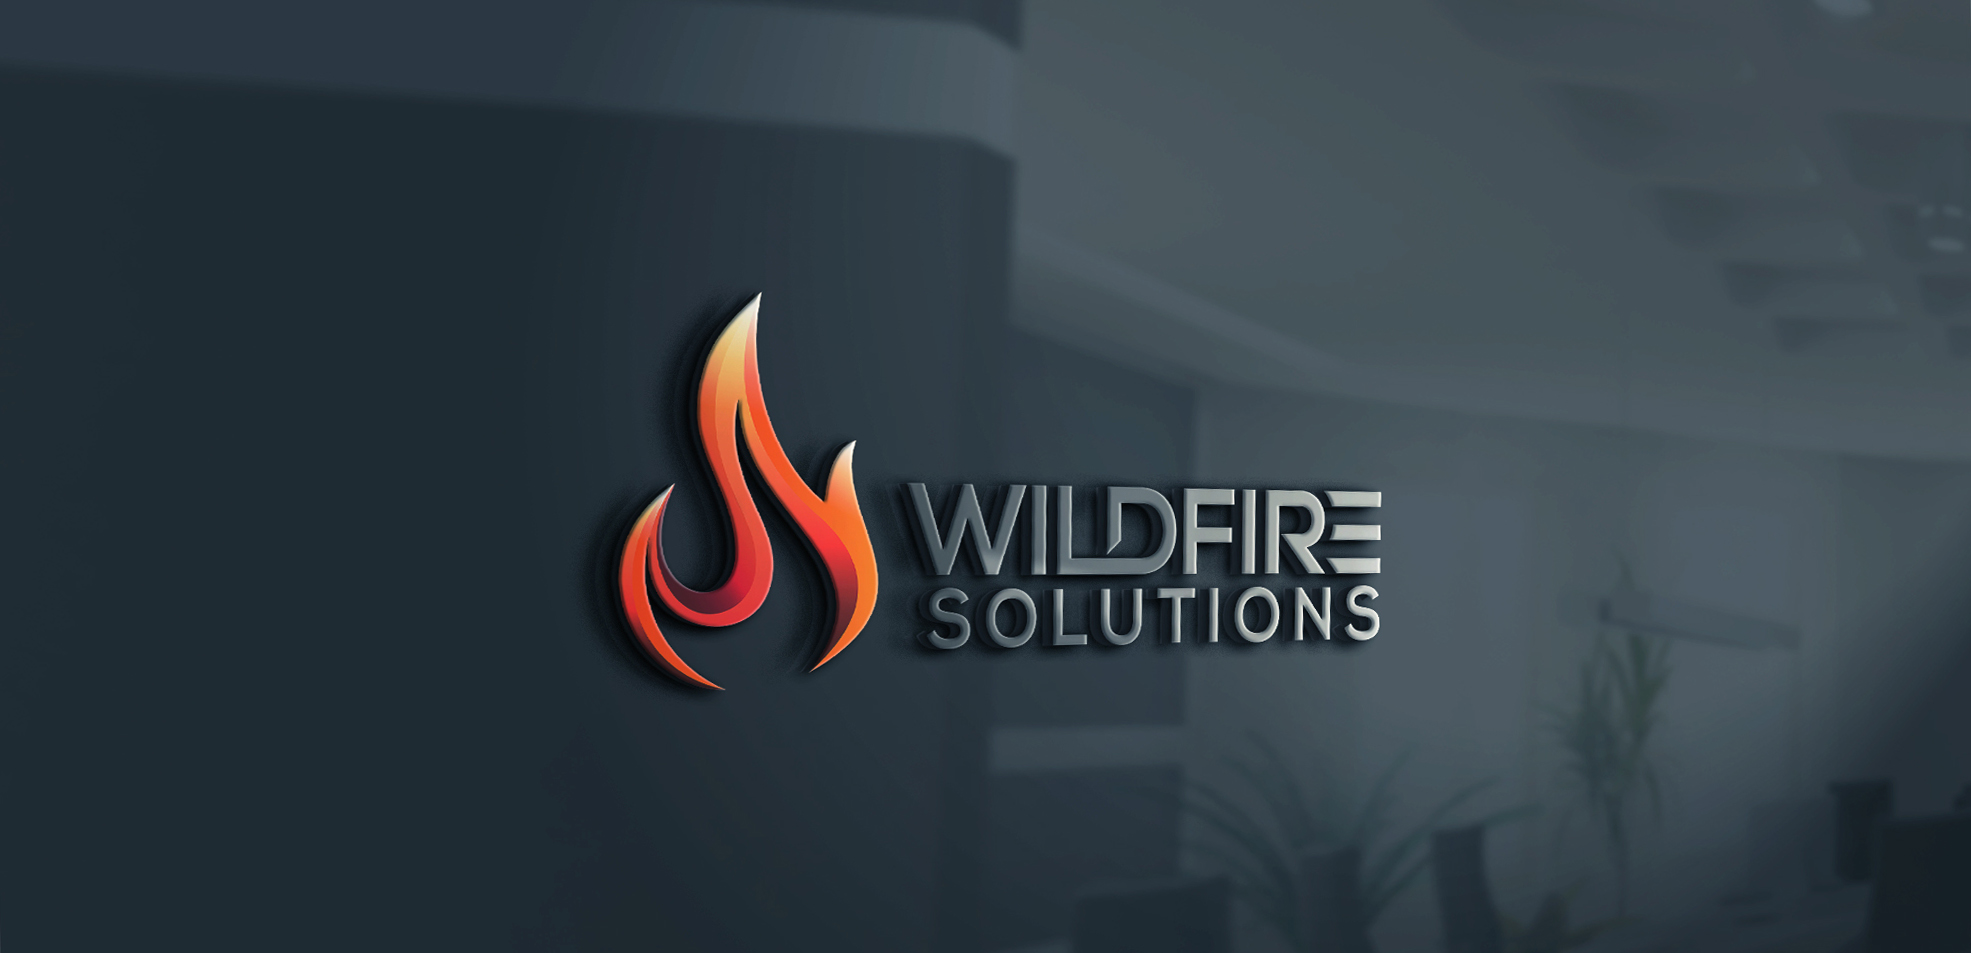 Wildfire Solutions - ideas ignited